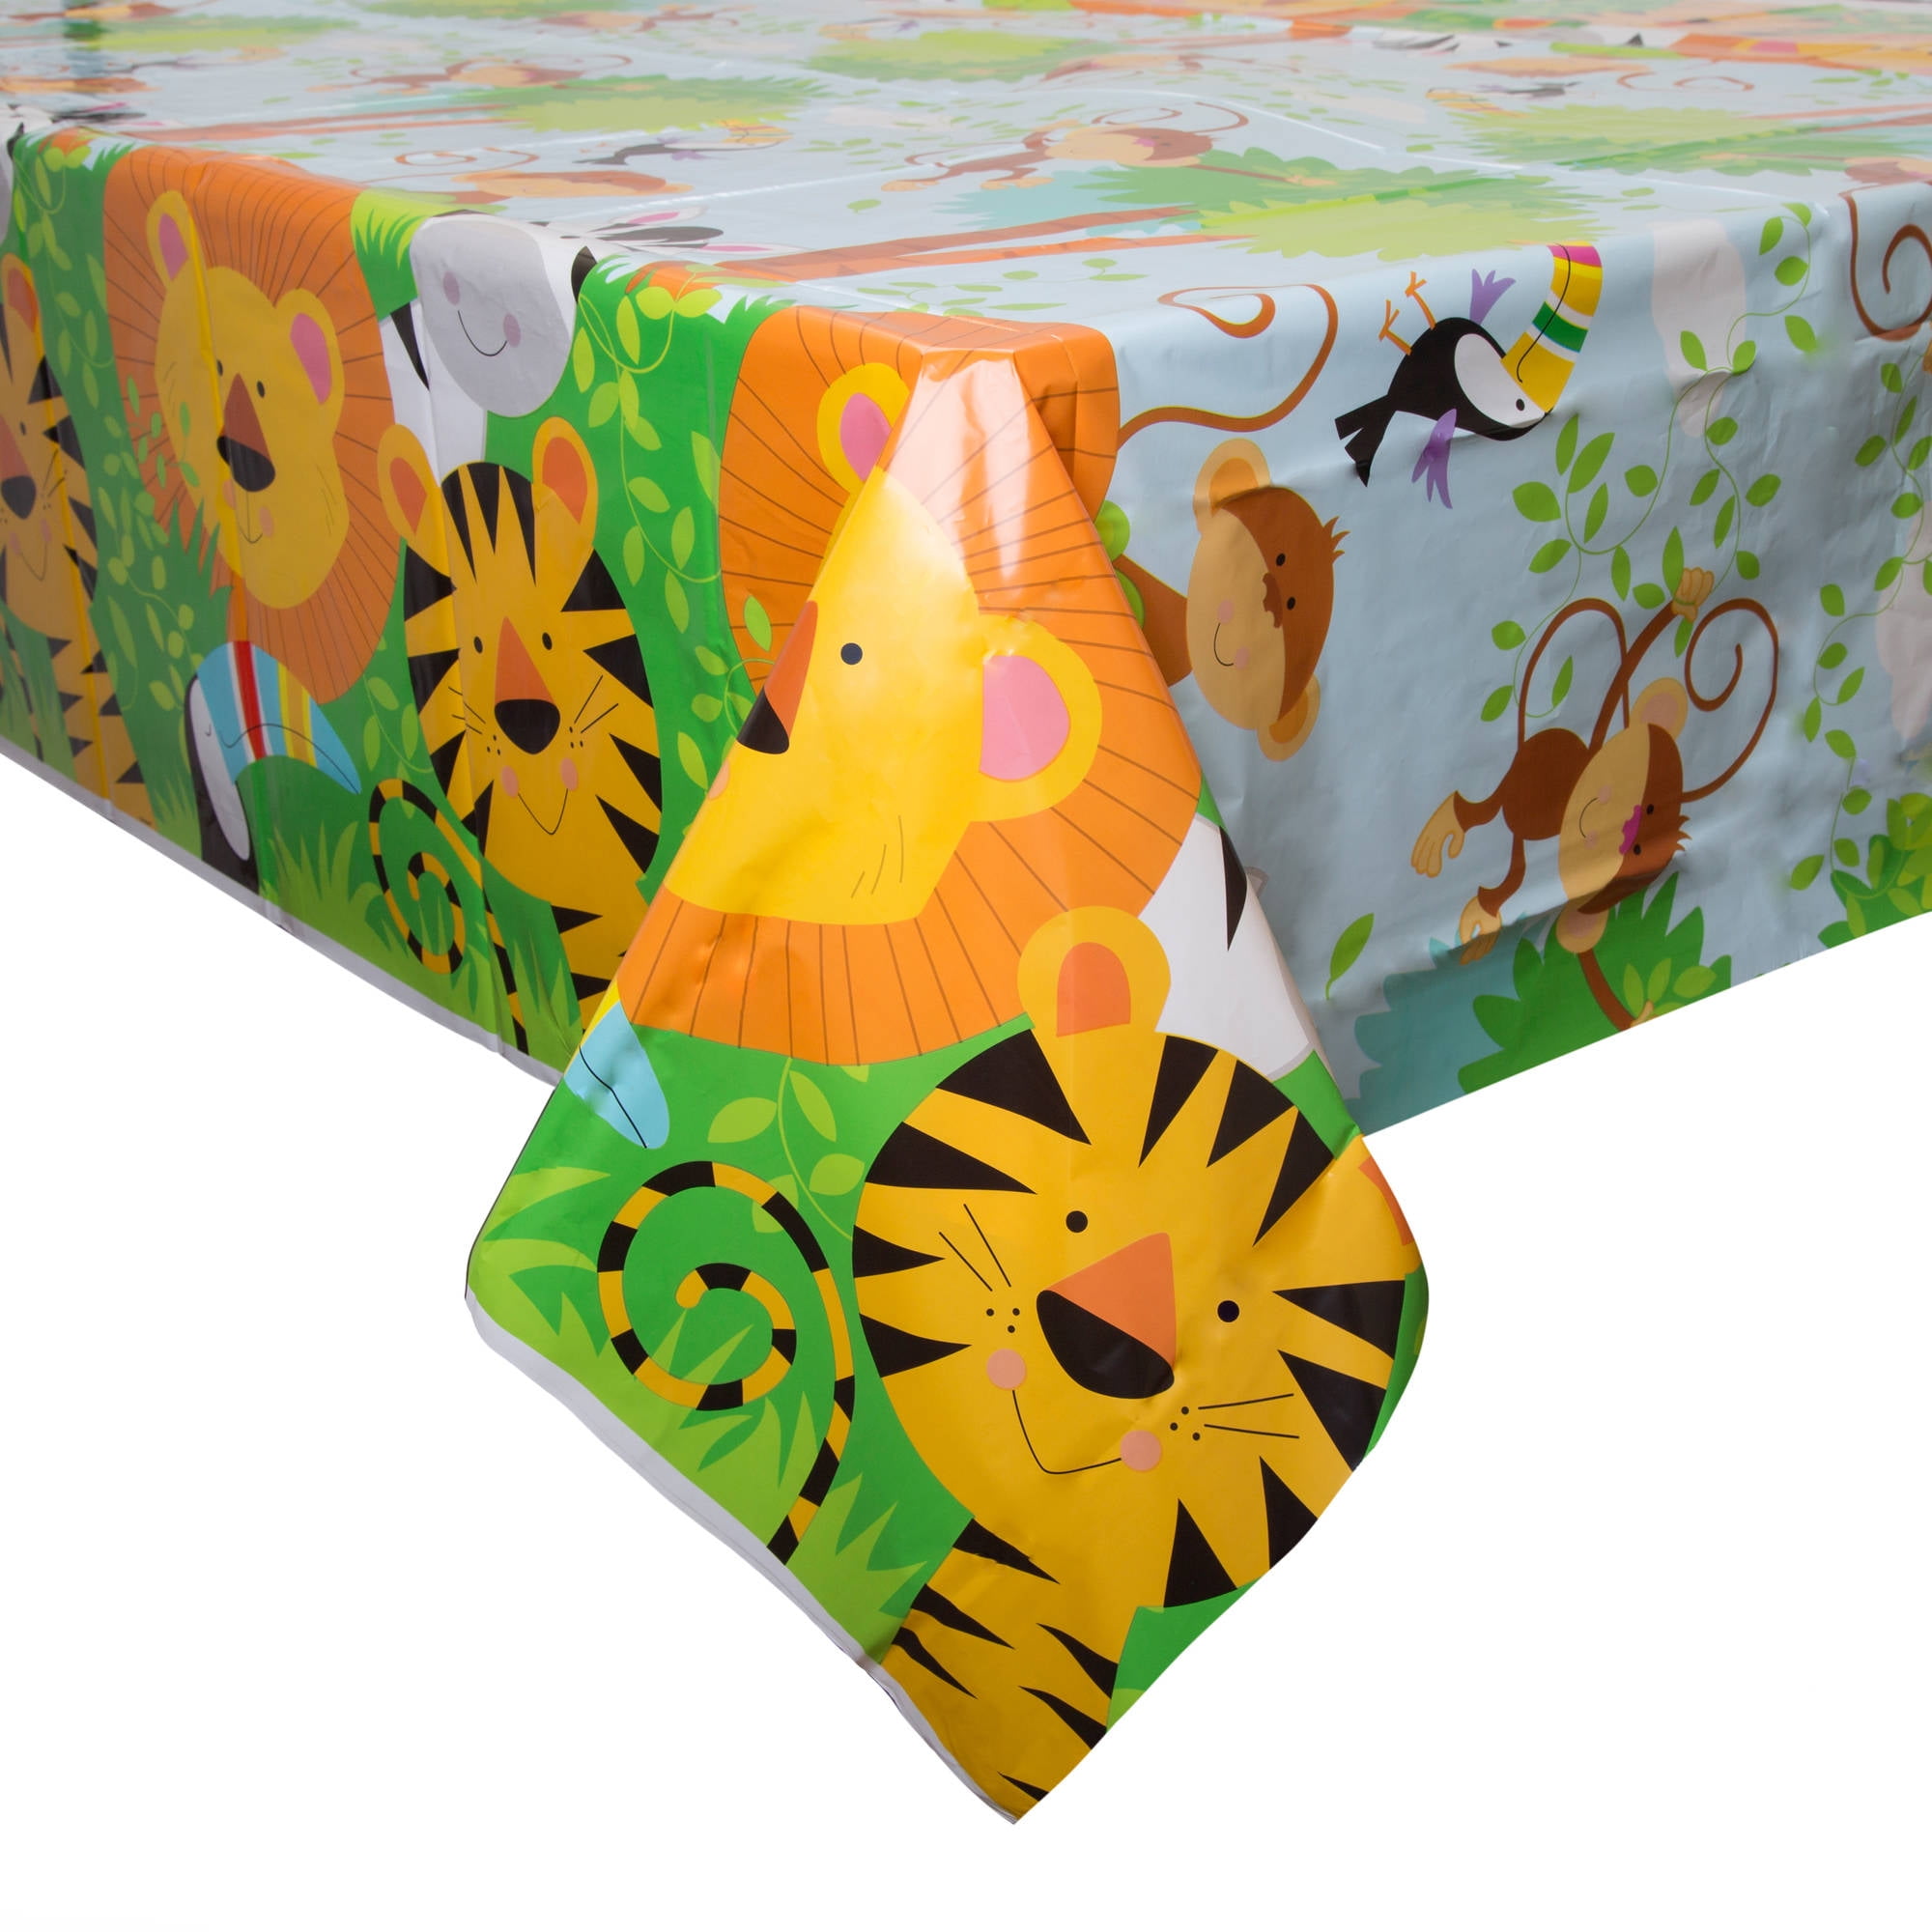 WERNNSAI Jungle Safari Animals Party Table Cover 1 Pack 137 x 274 cm Disposable Plastic Tablecloth Zoo Theme Party Supplies for Kid Birthday Baby Shower Party Decorations 